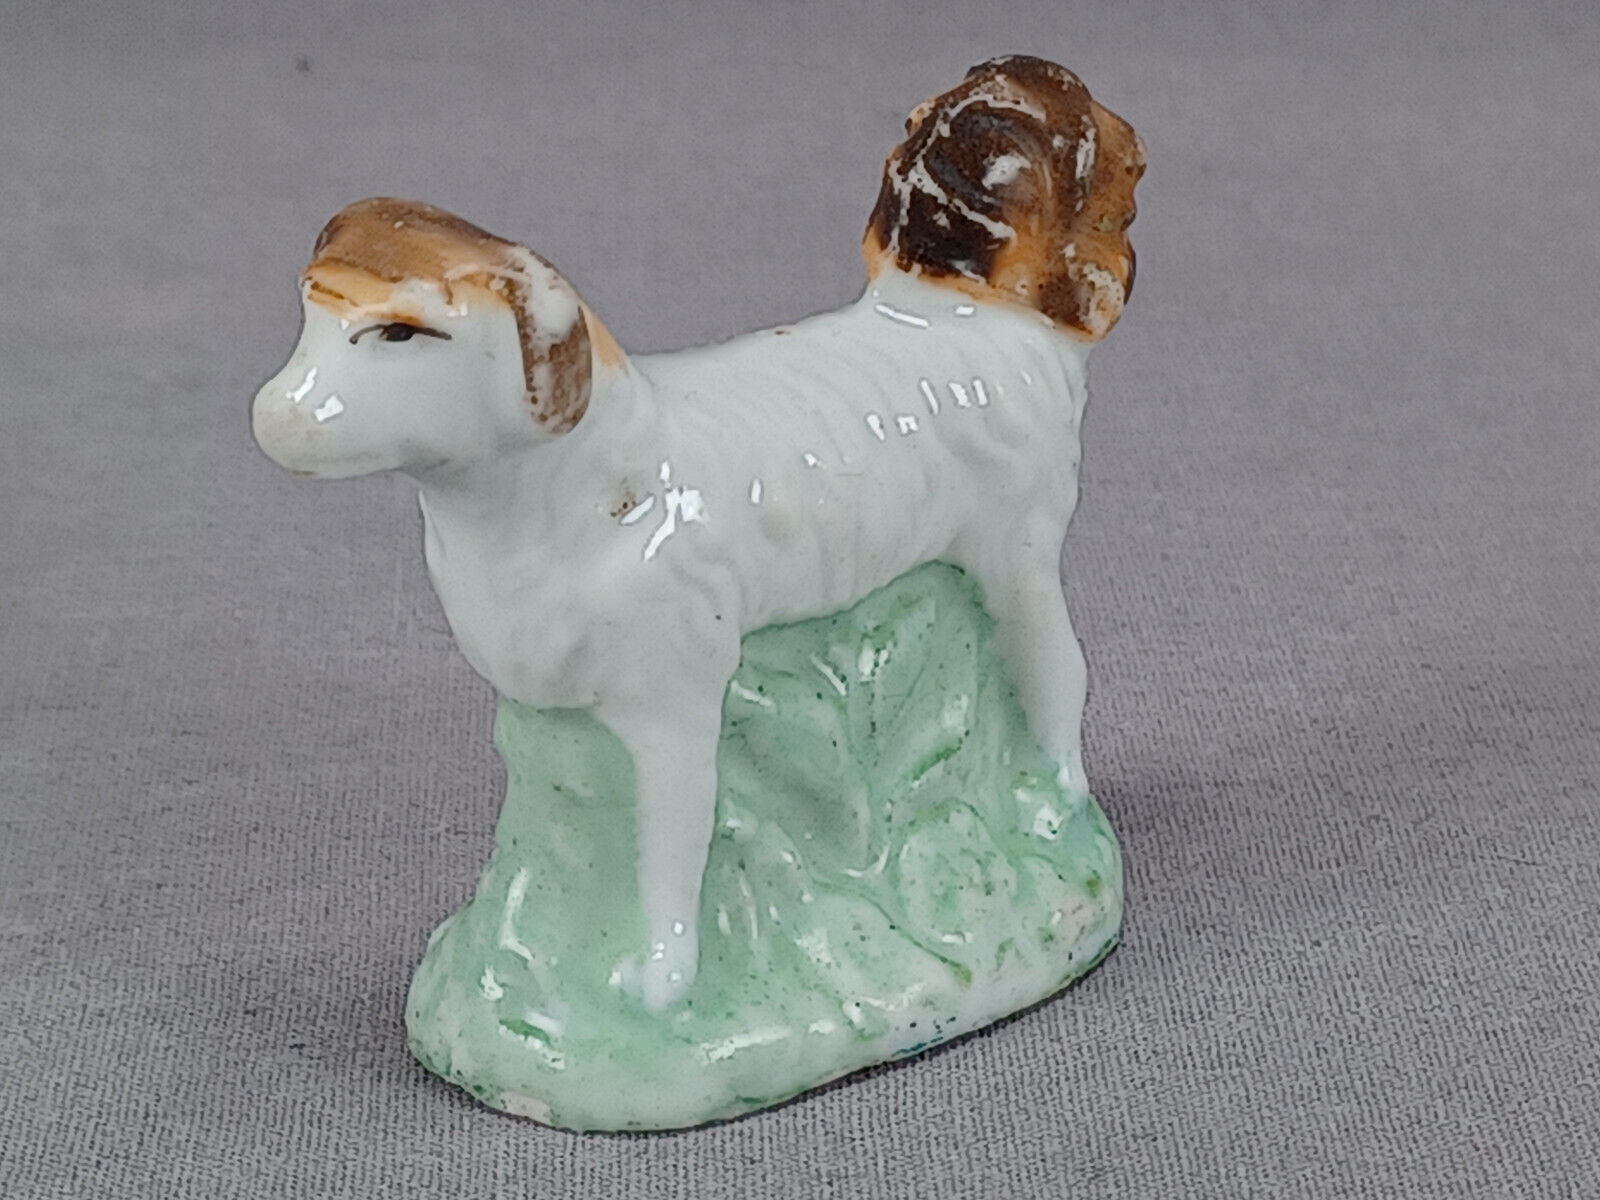 French / German Hand Painted Hard Paste Porcelain Dog Figurine C. 1830-1850s B